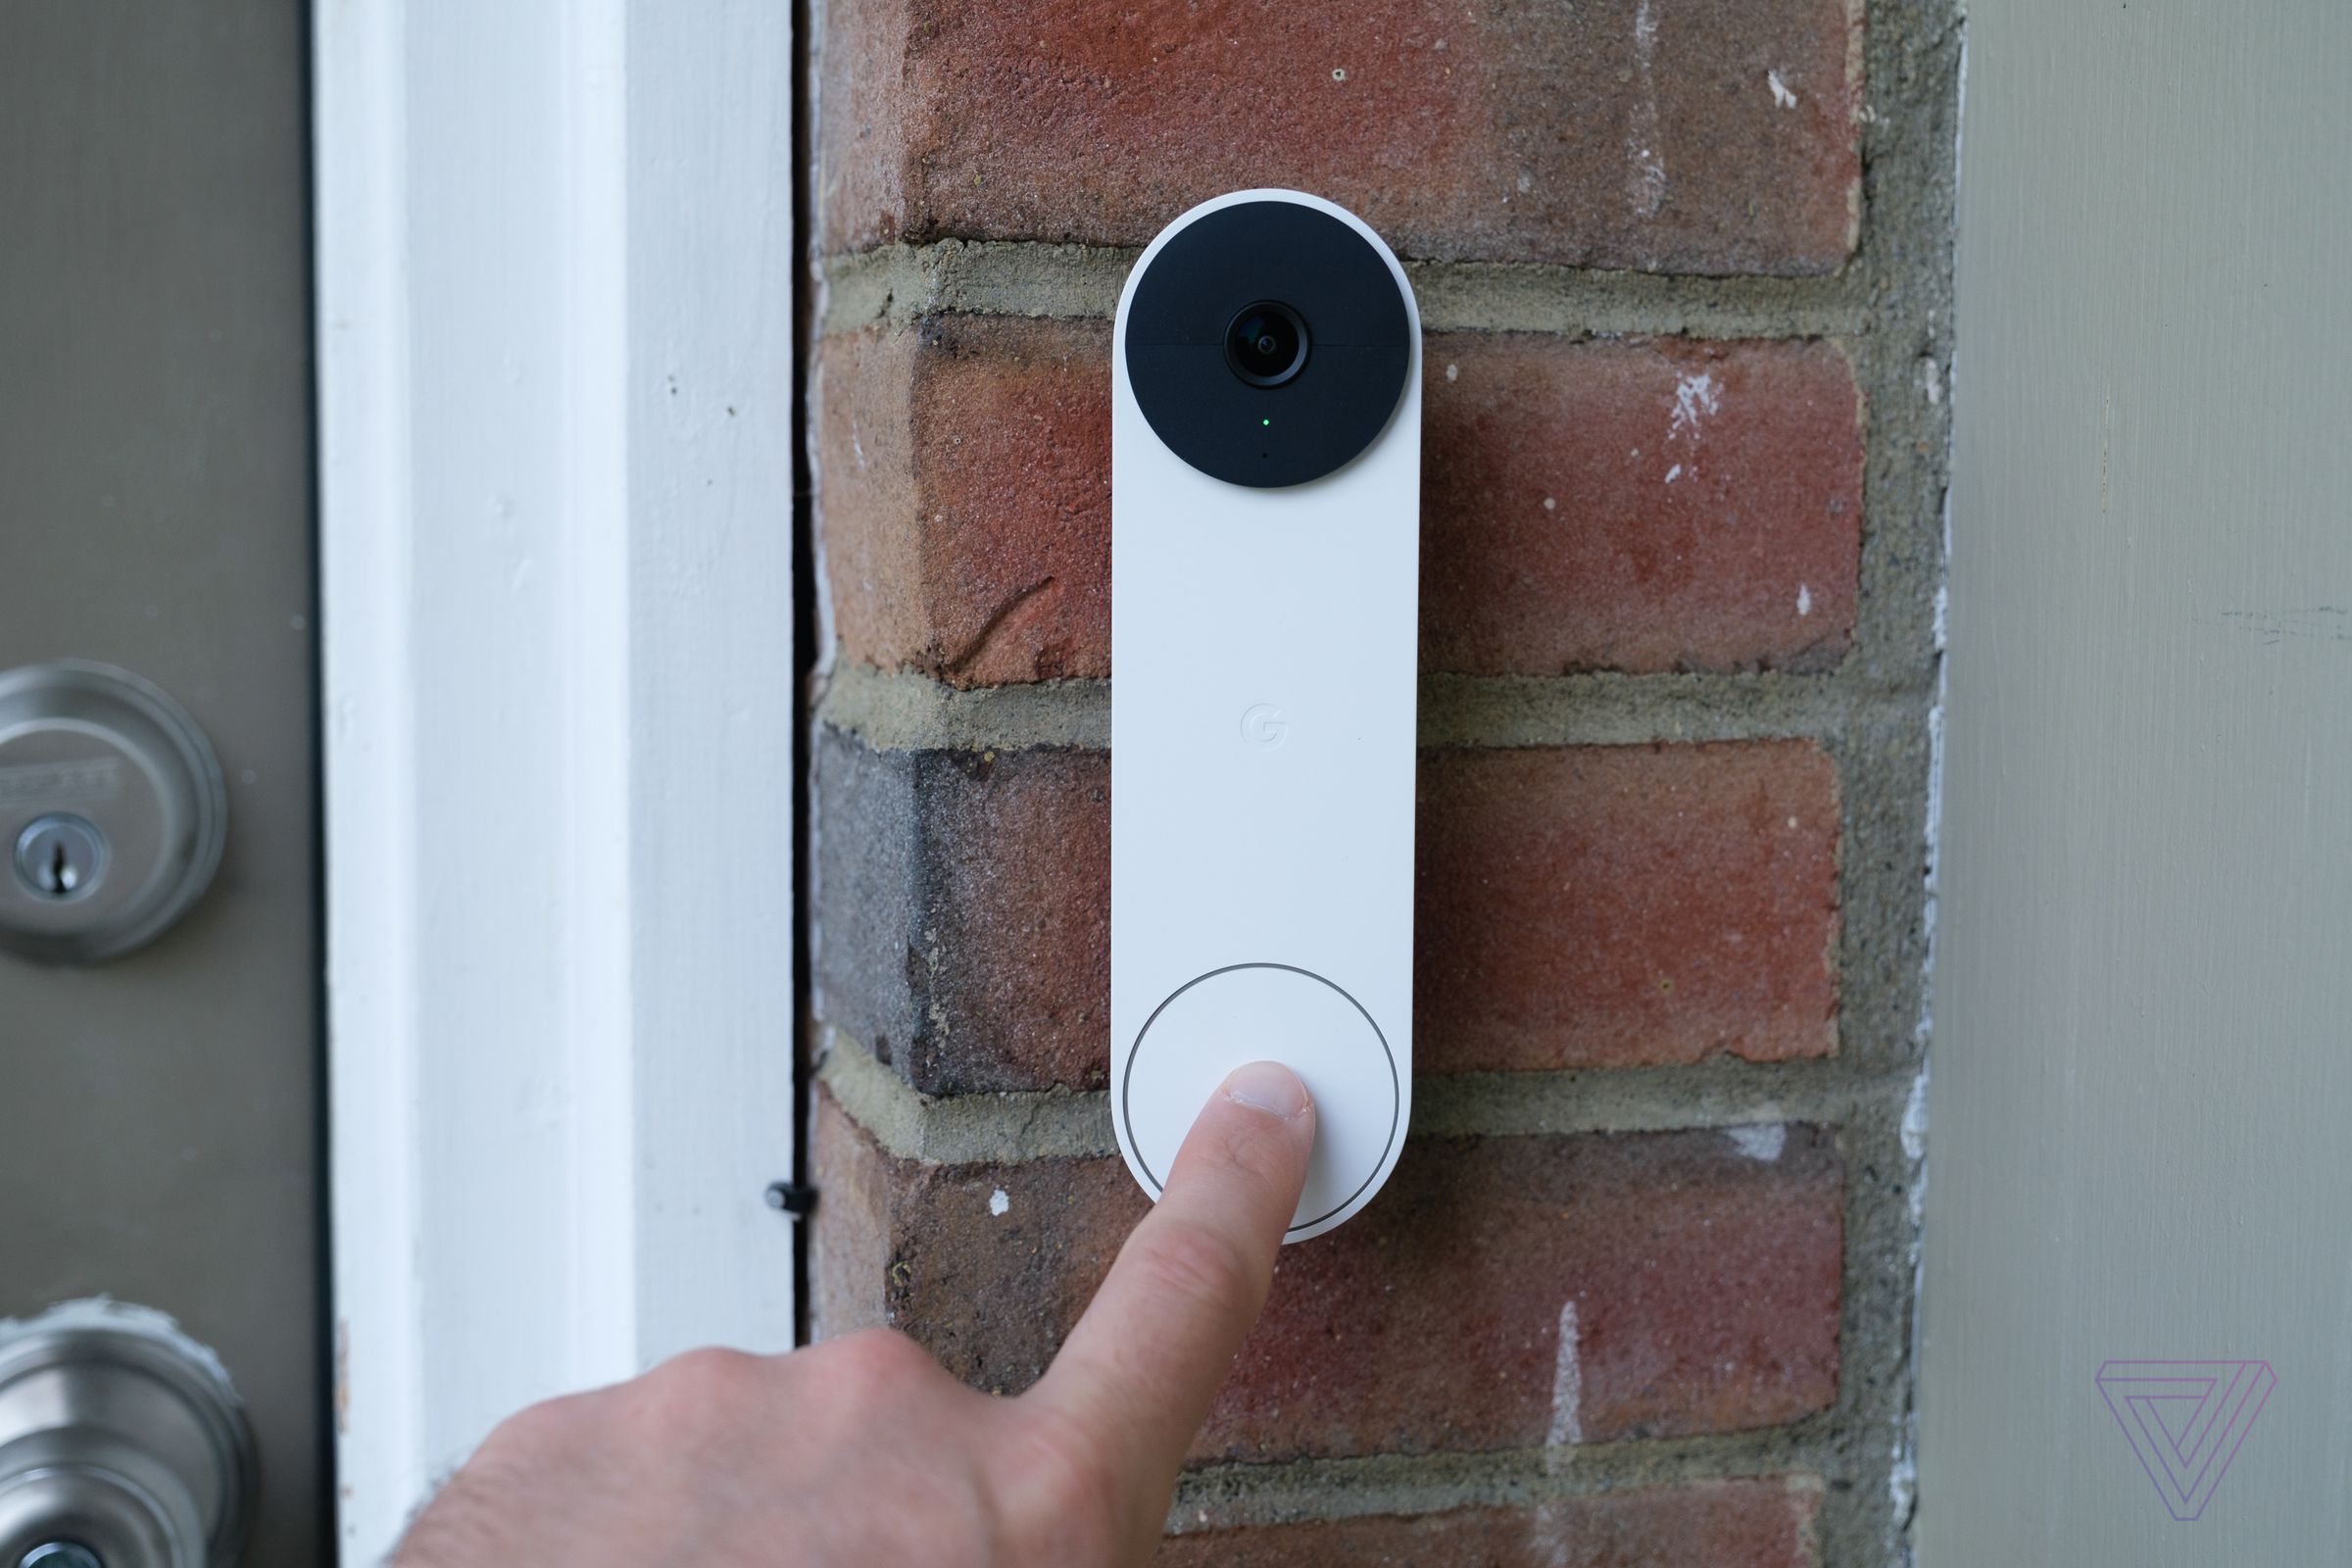 The Nest Doorbell (battery) has lower quality video specs than the current Nest Doorbell (wired).